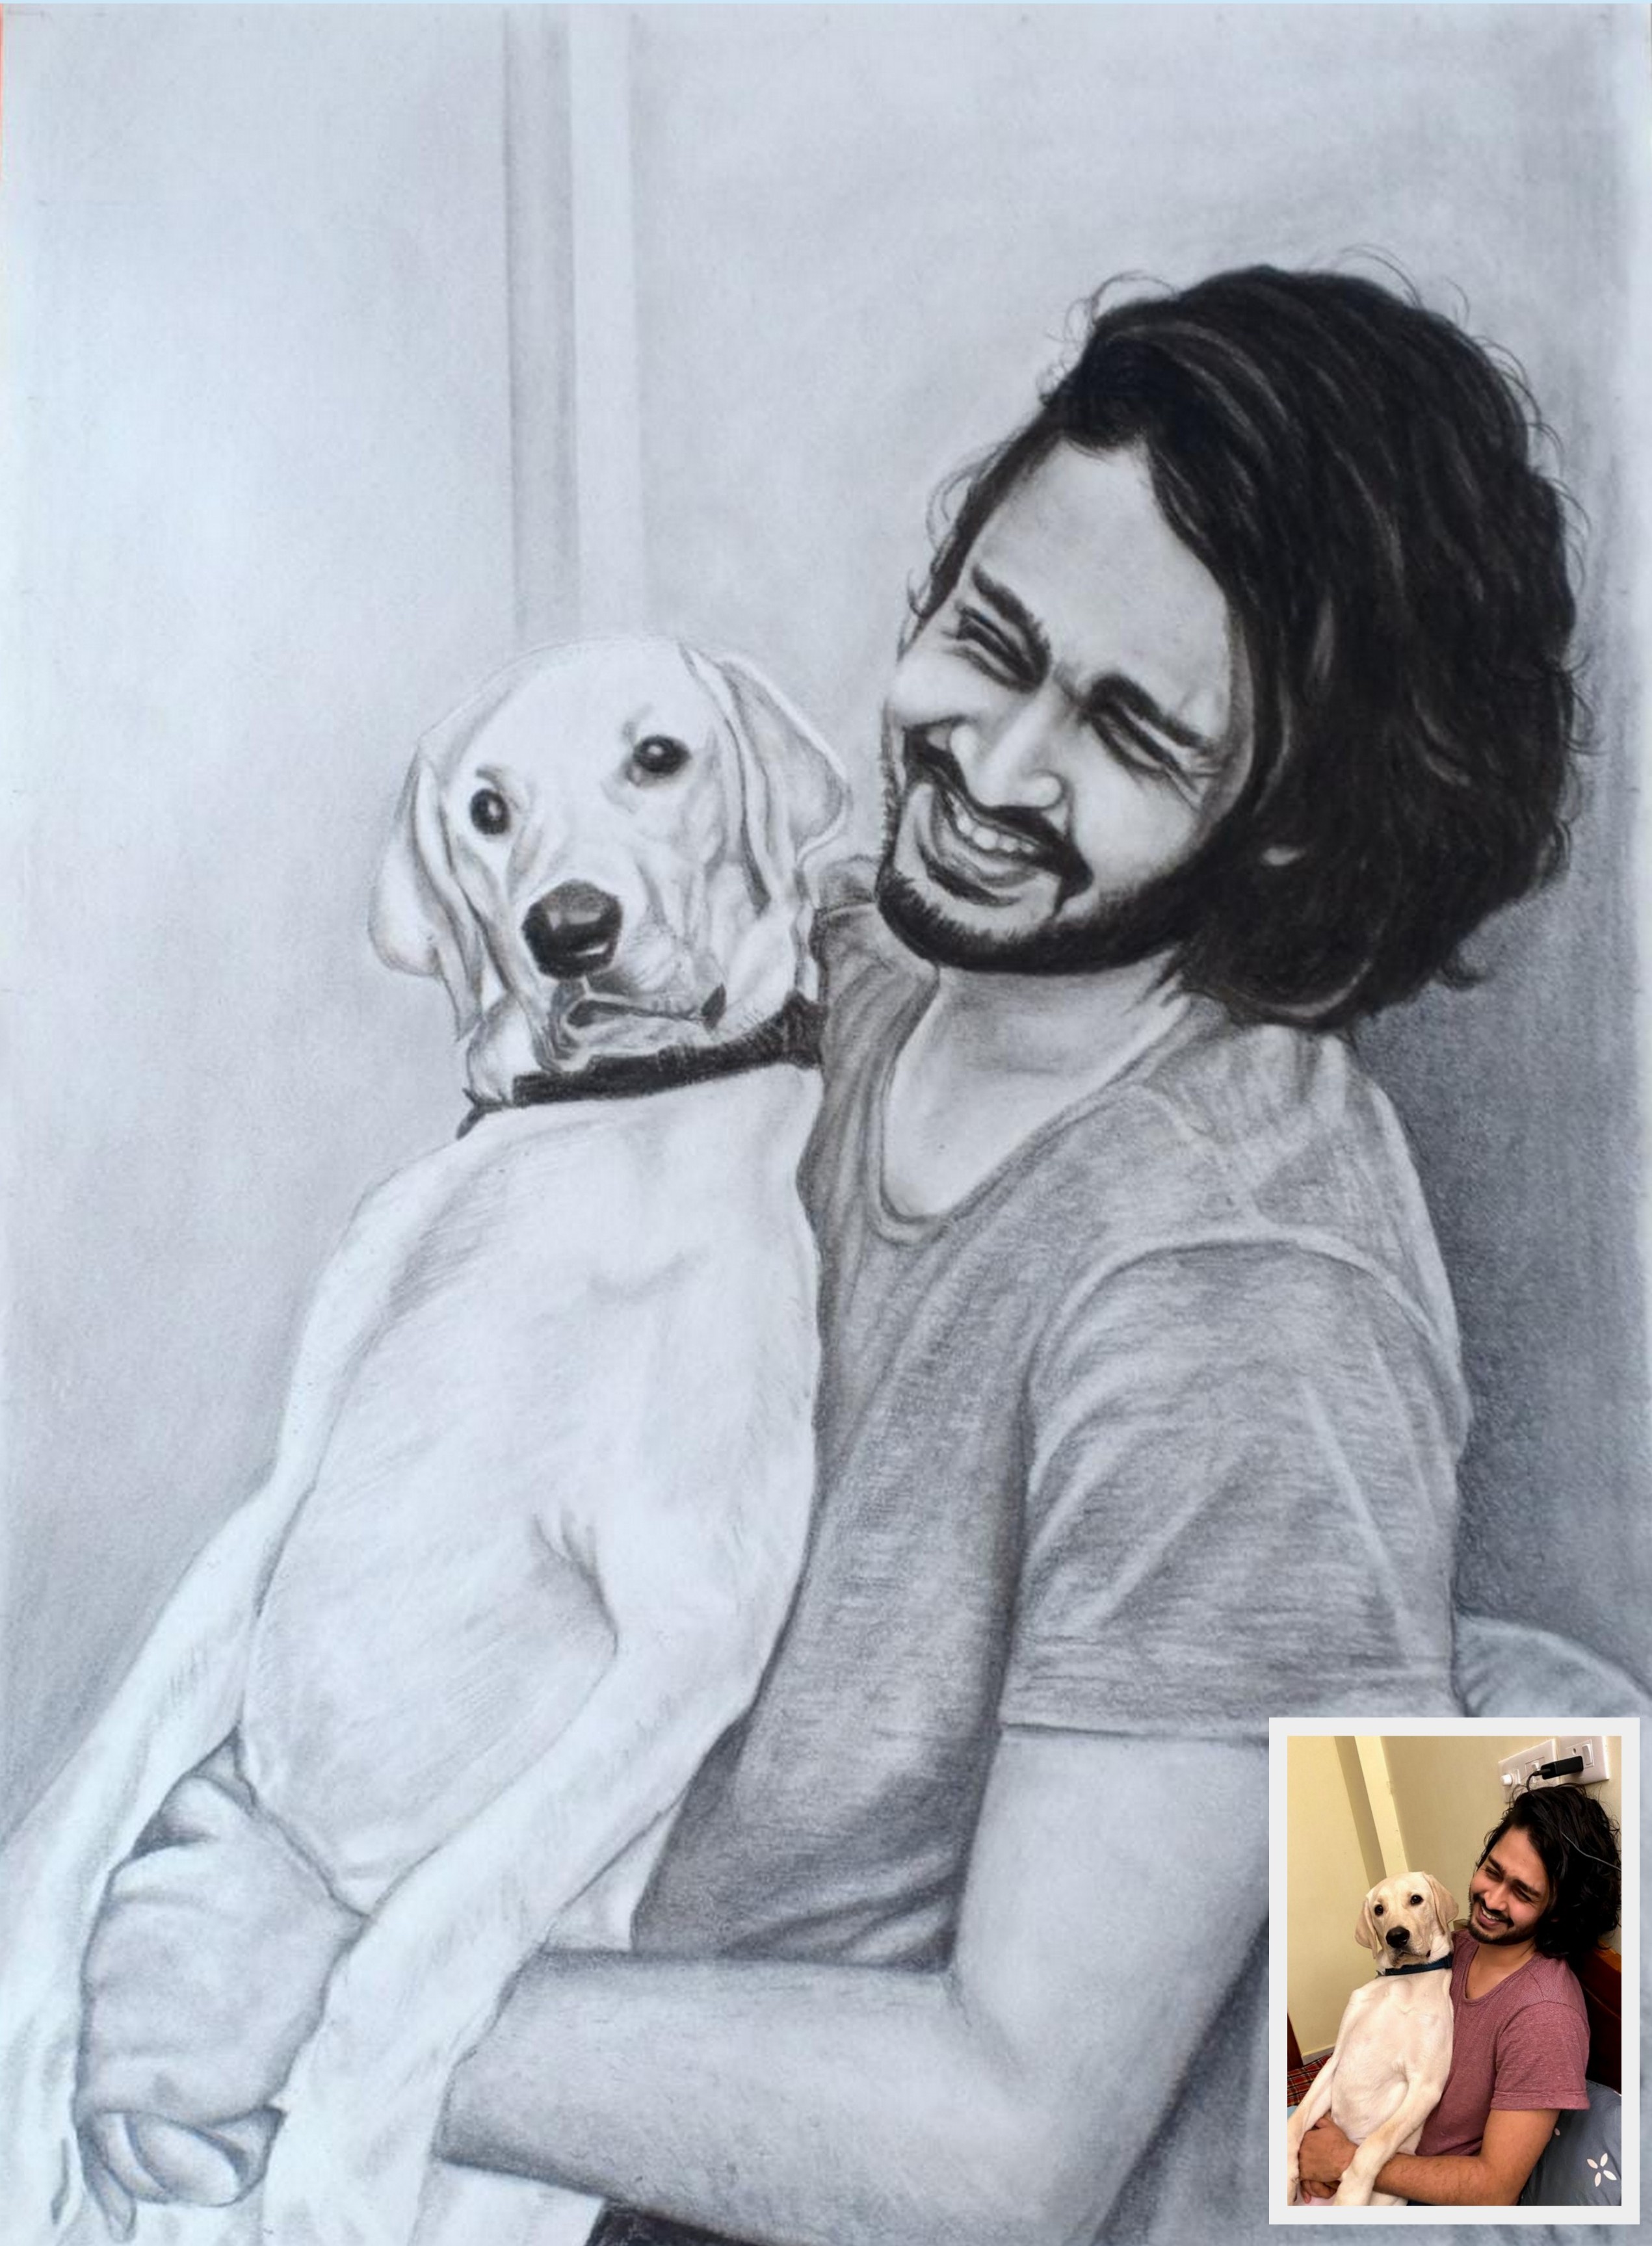 Charcoal pencil sketch of a man with a dog on his lap